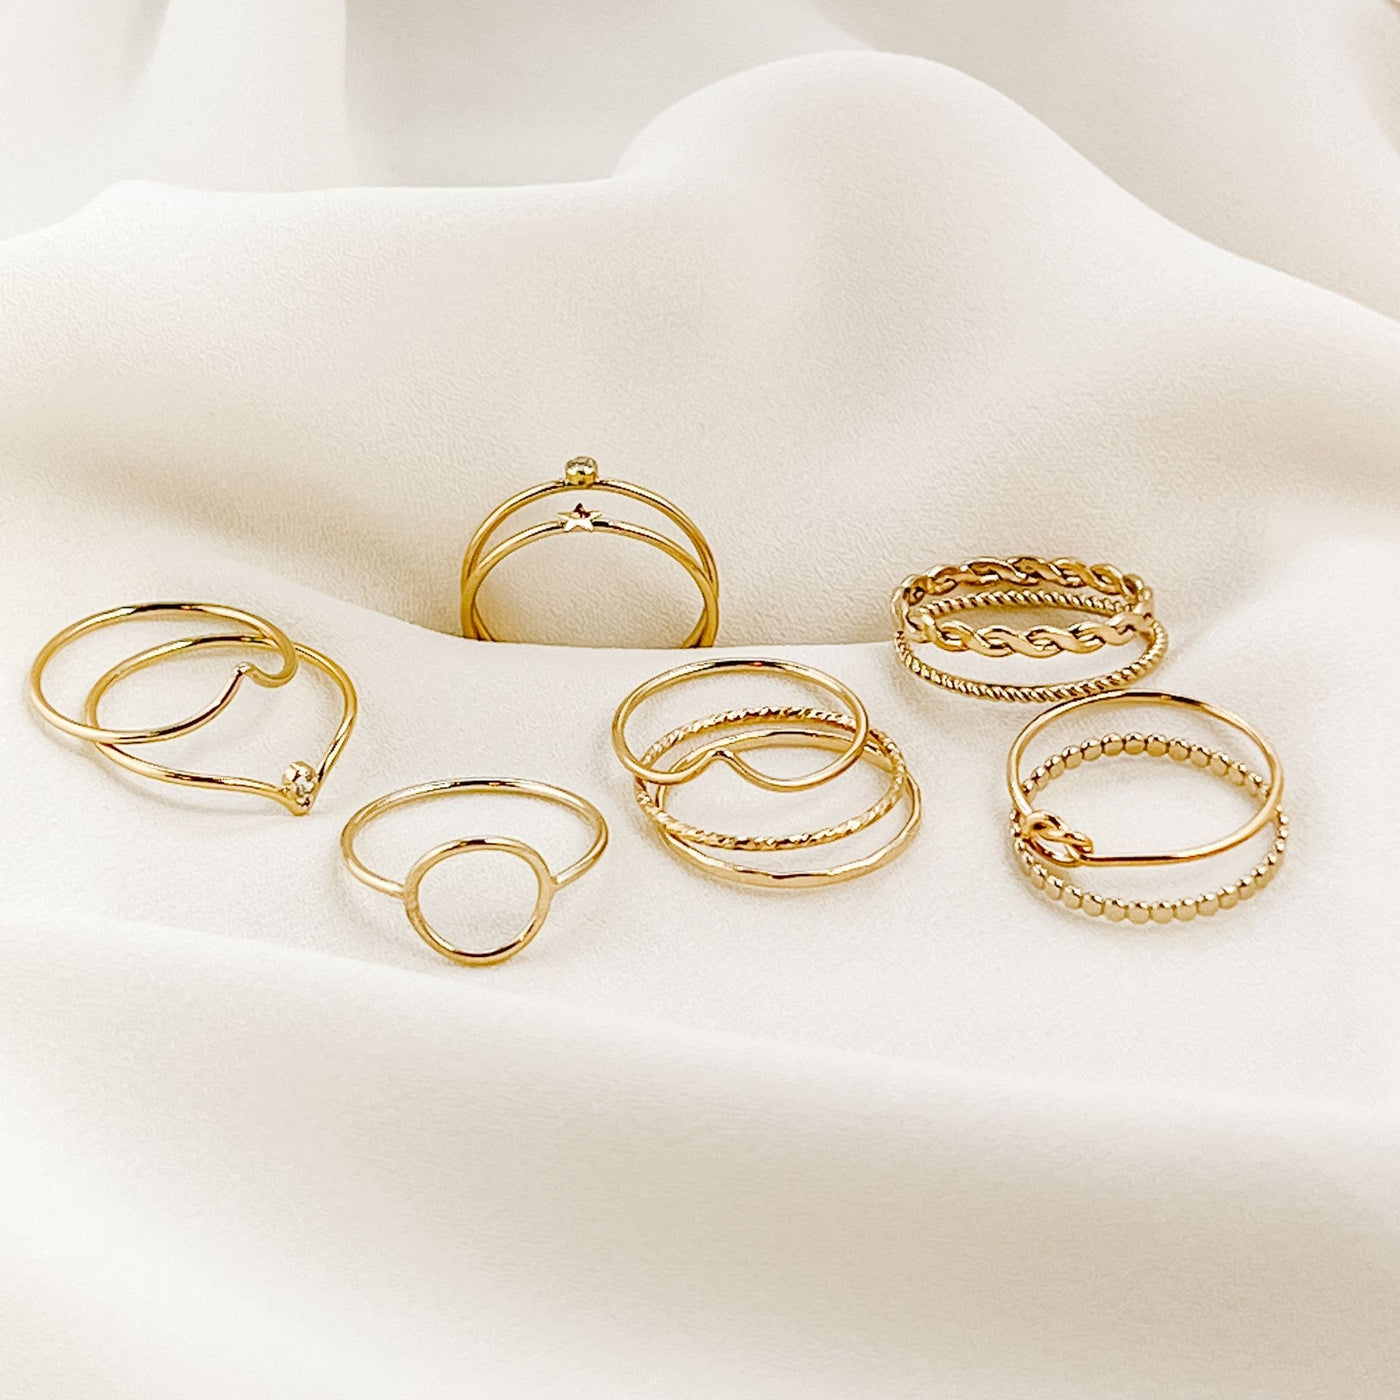 Assortment of 12 minimalist 14KGF stacking rings displayed on cream colored fabric 